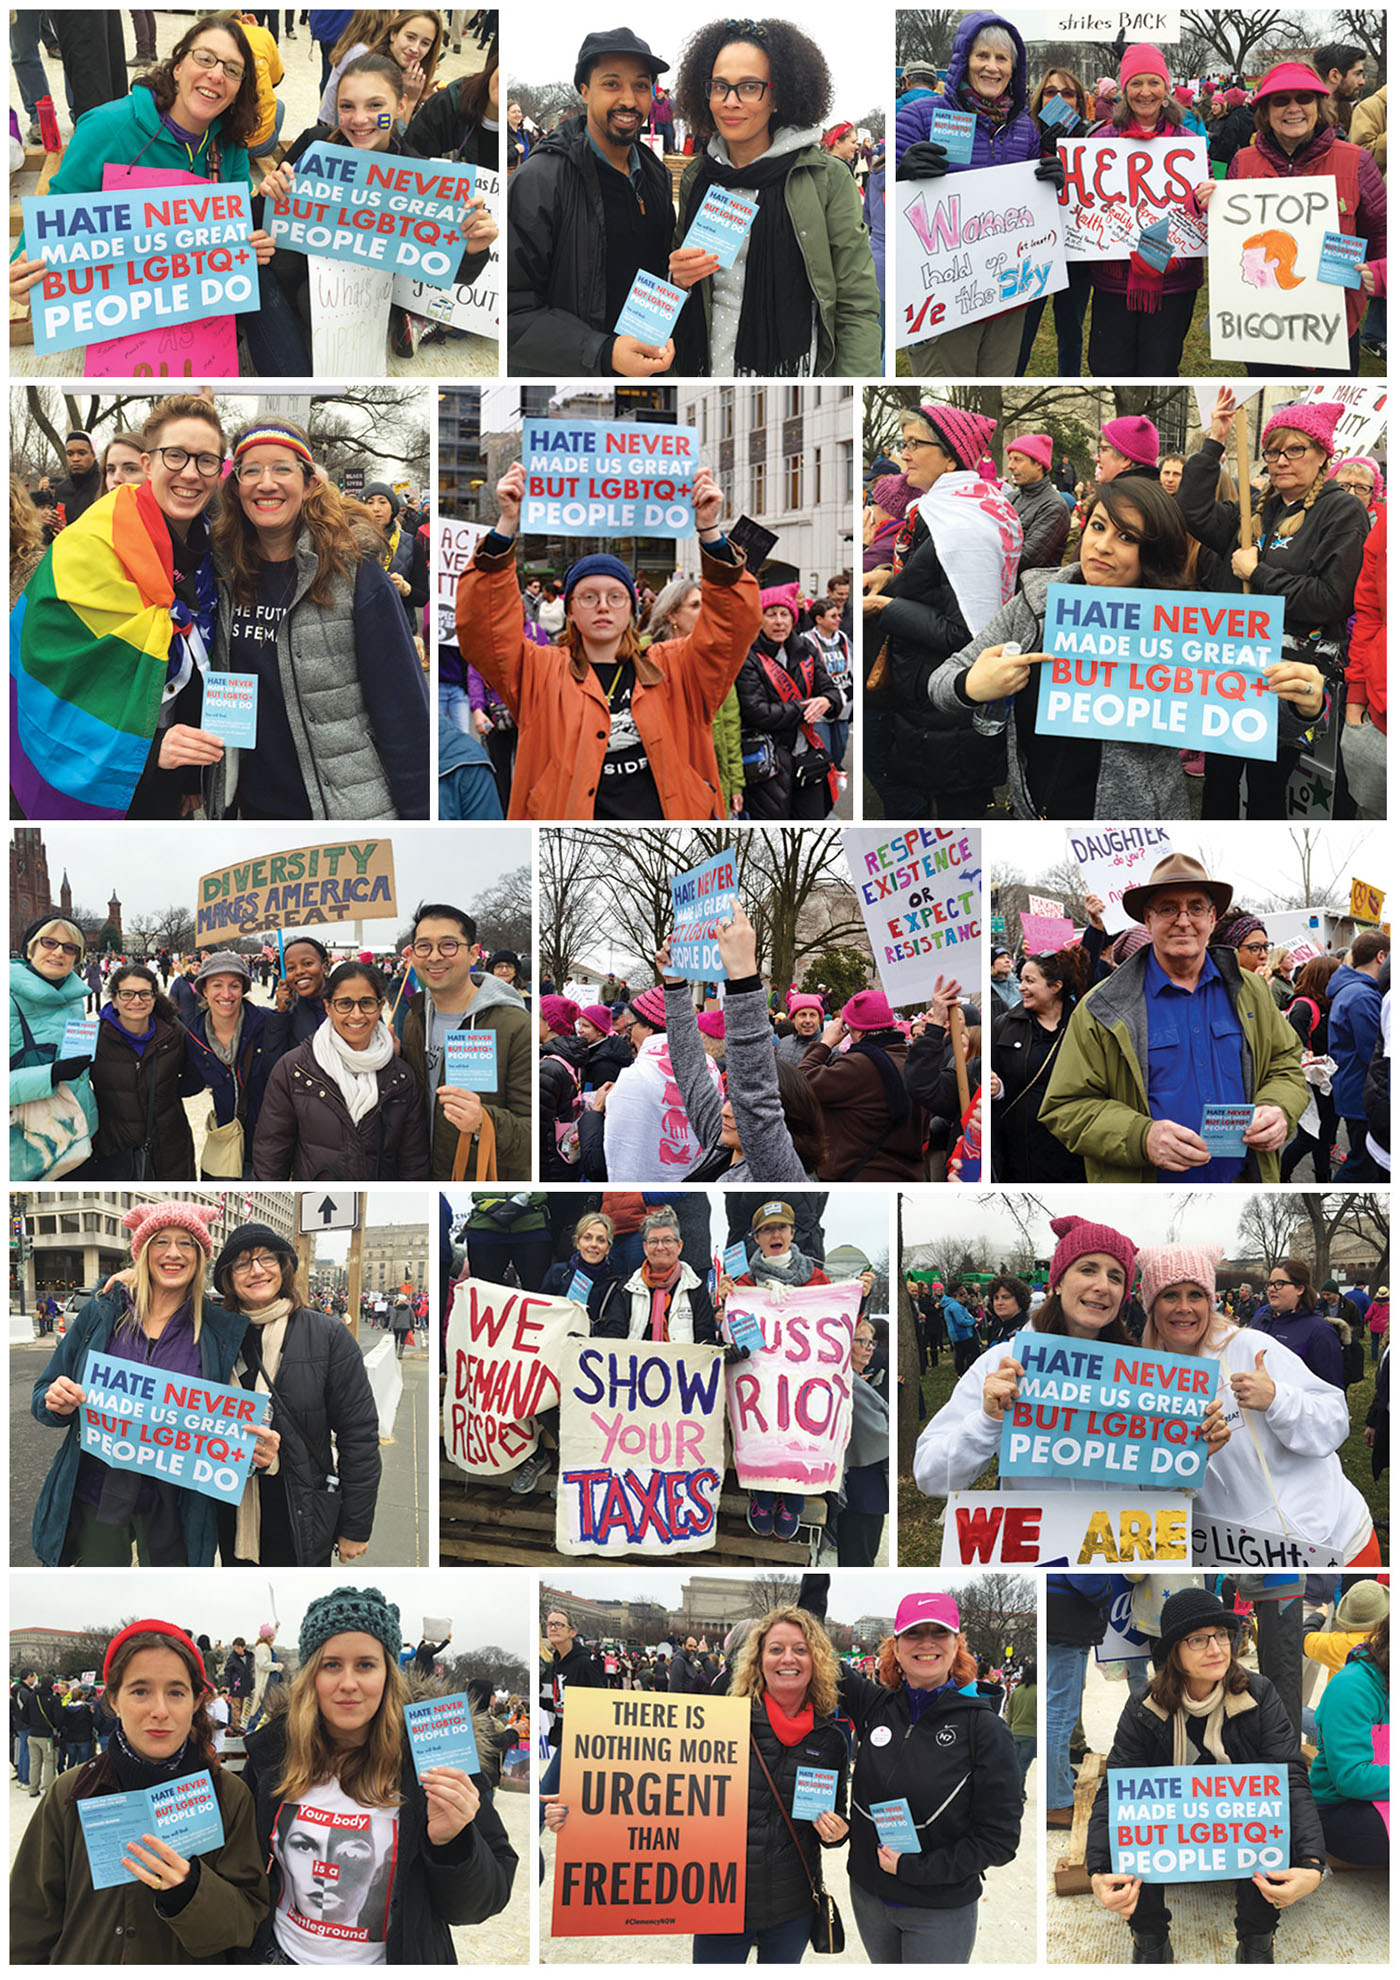 women's march protest pamphlet poster LGBTQ+ advocacy activism Trump LGBT march on washington